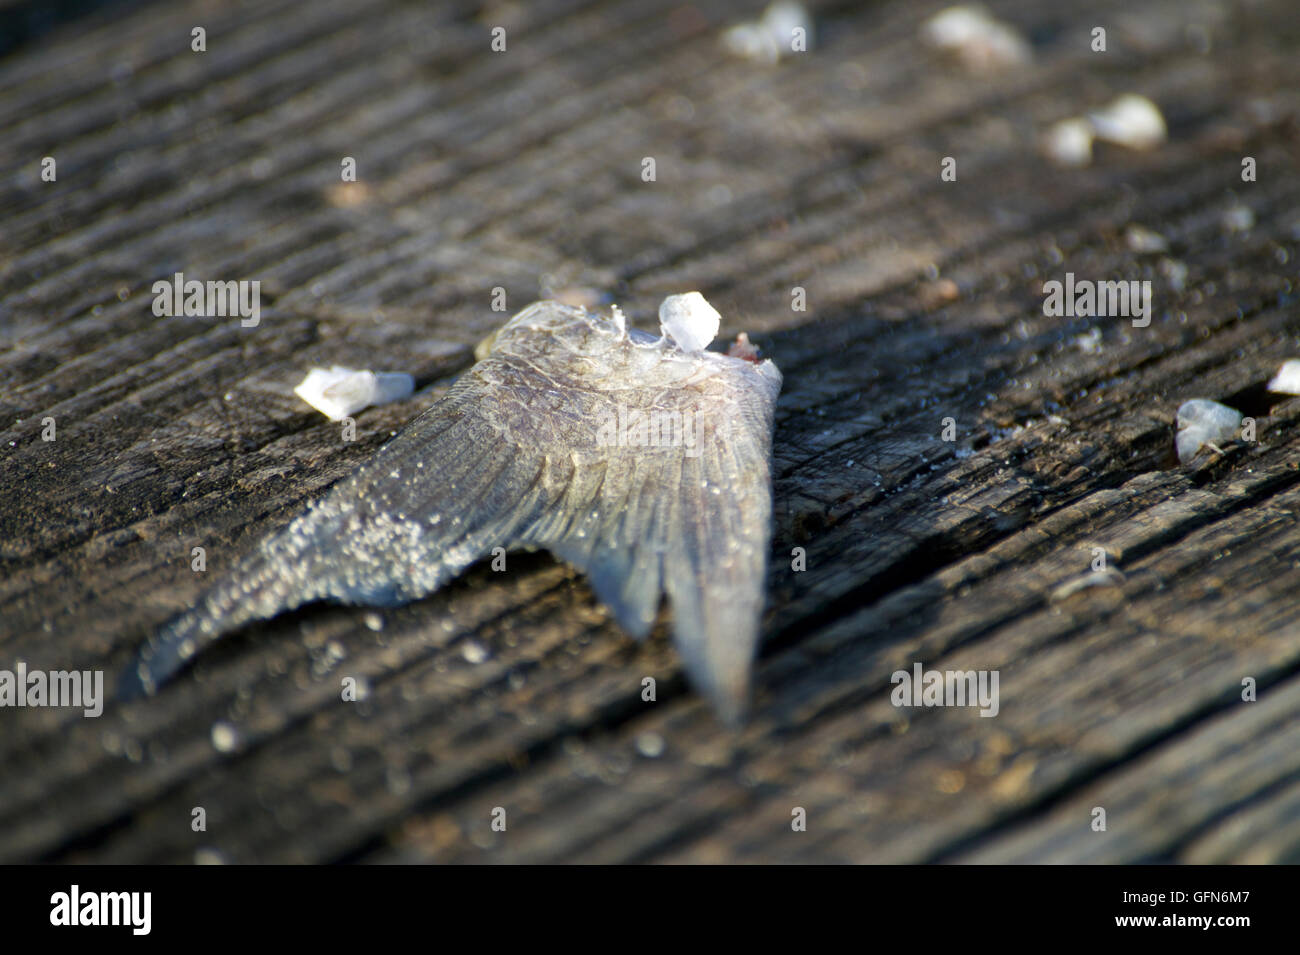 The remains of a fish, likely used as bait, on a pier Stock Photo